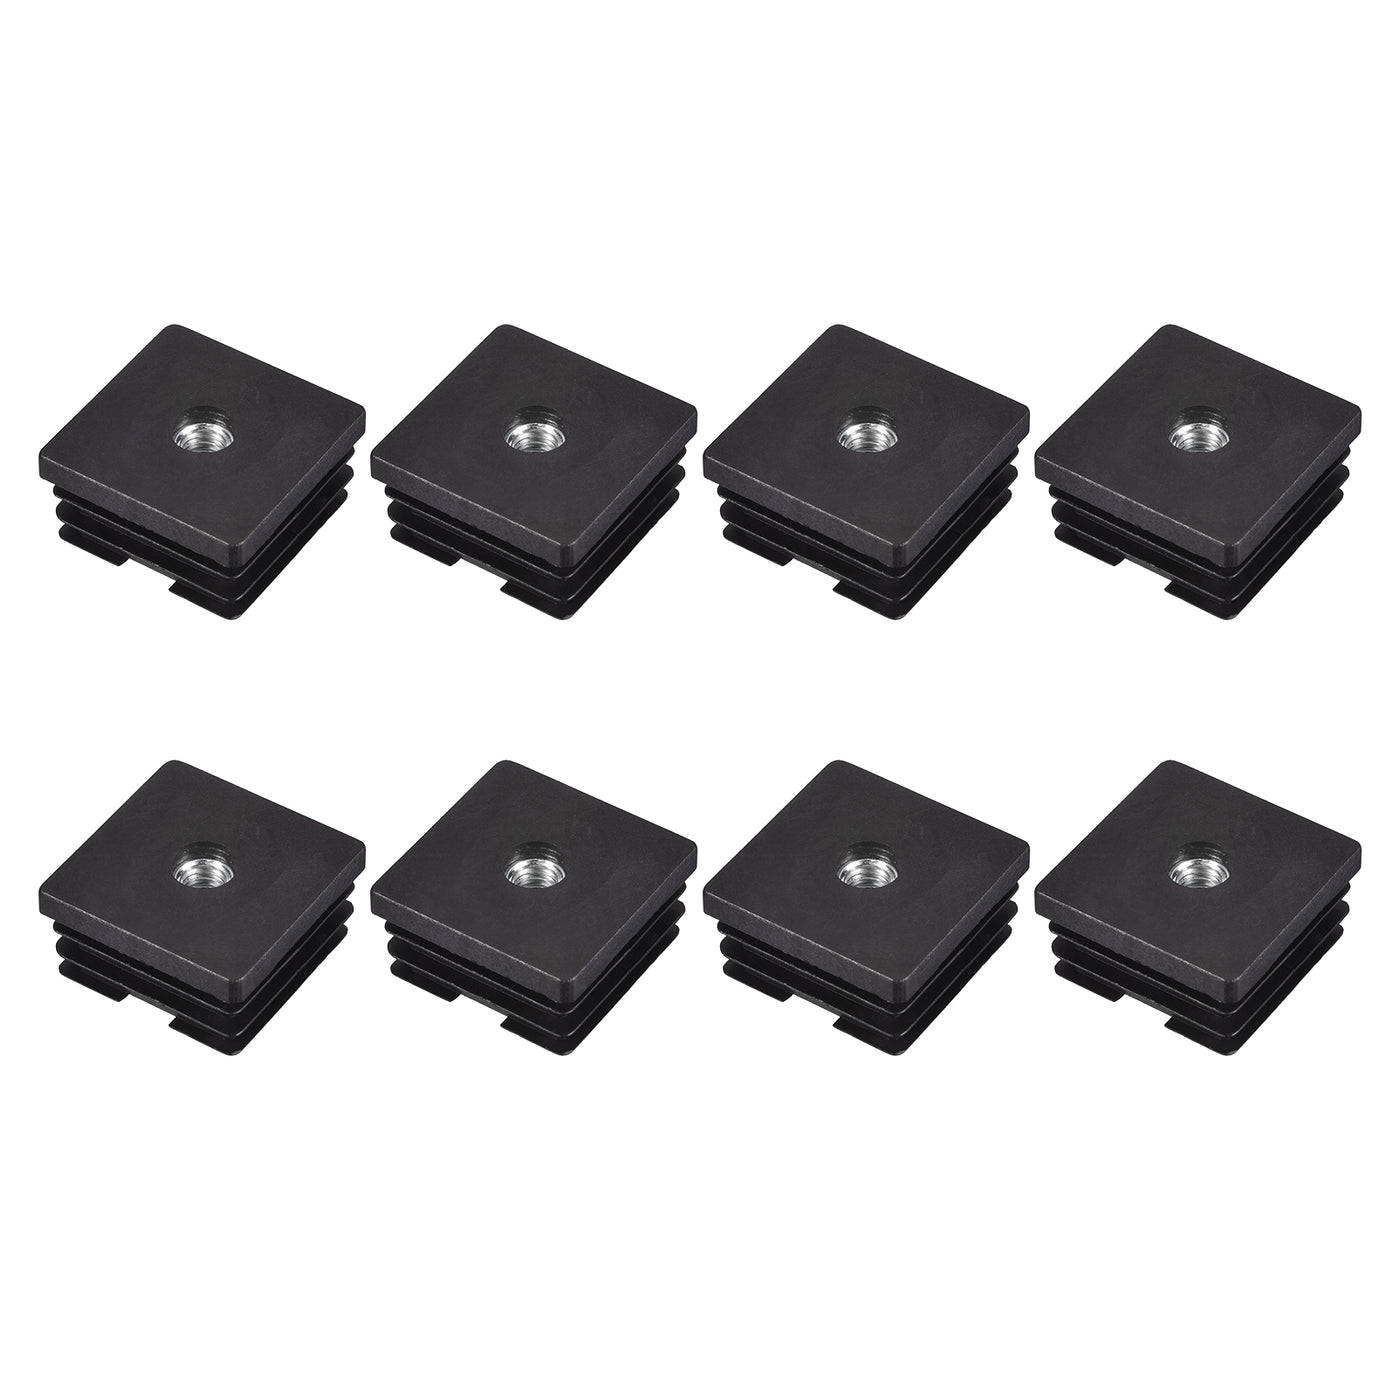 uxcell Uxcell 8Pcs 1.5"x1.5" Caster Insert with Thread, Square M8 Thread for Furniture